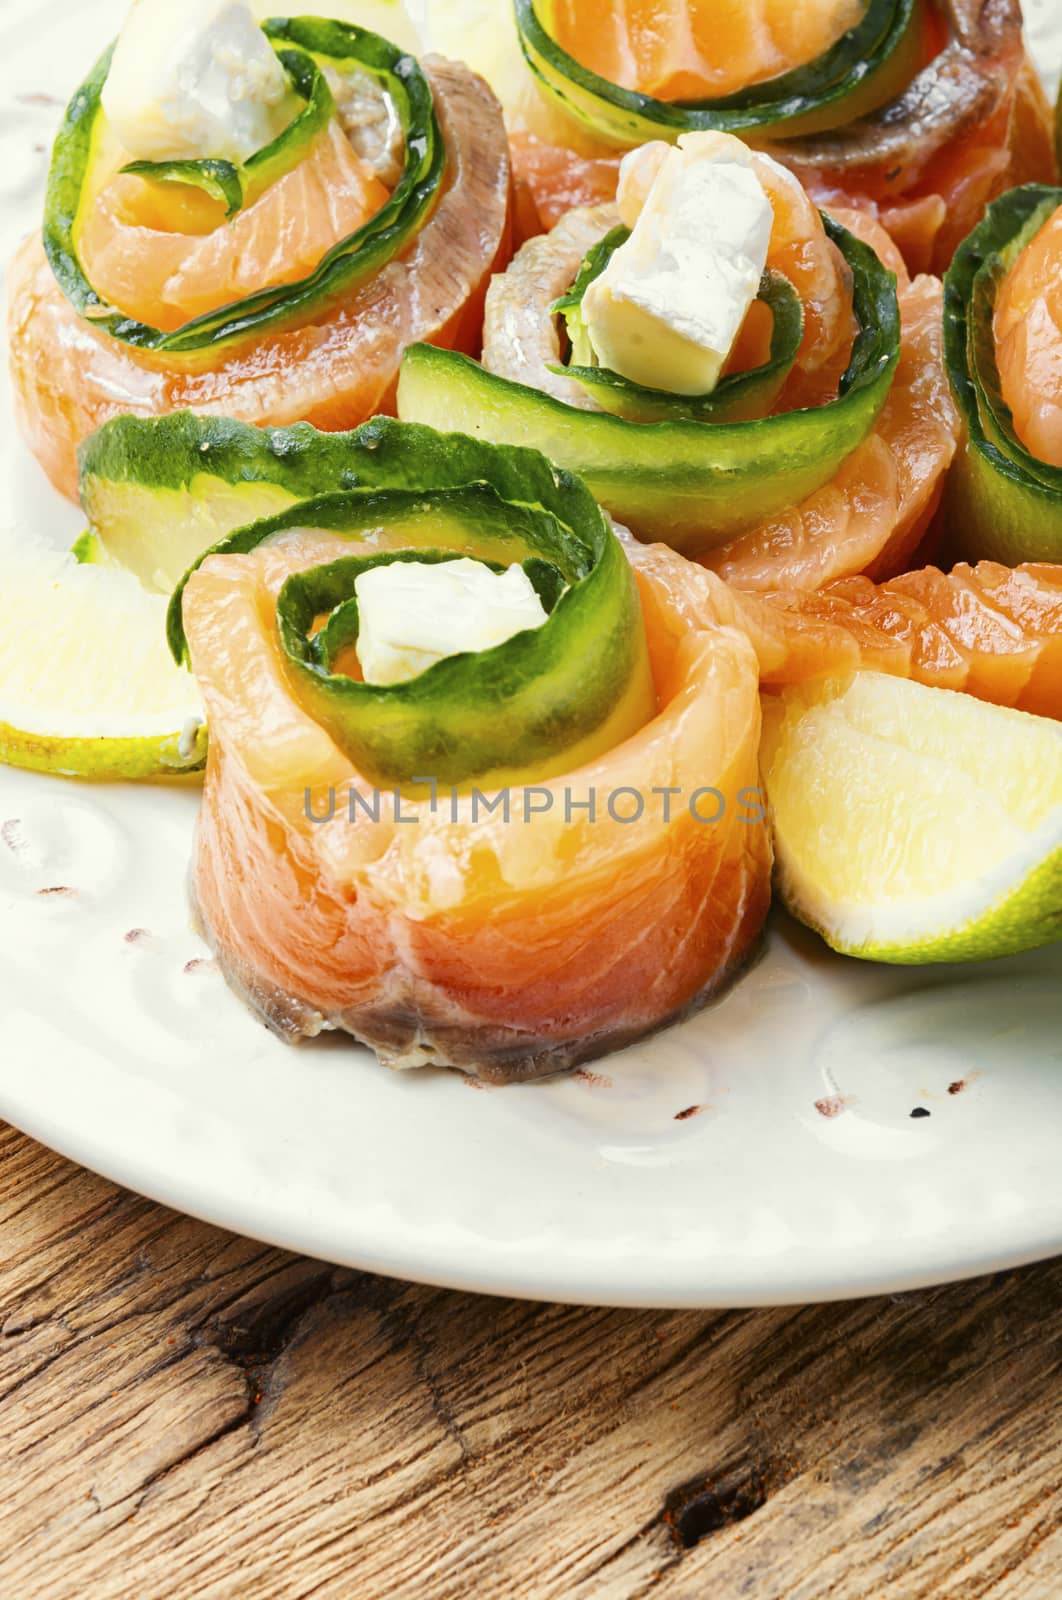 Salted salmon stuffed with cucumber and cheese.